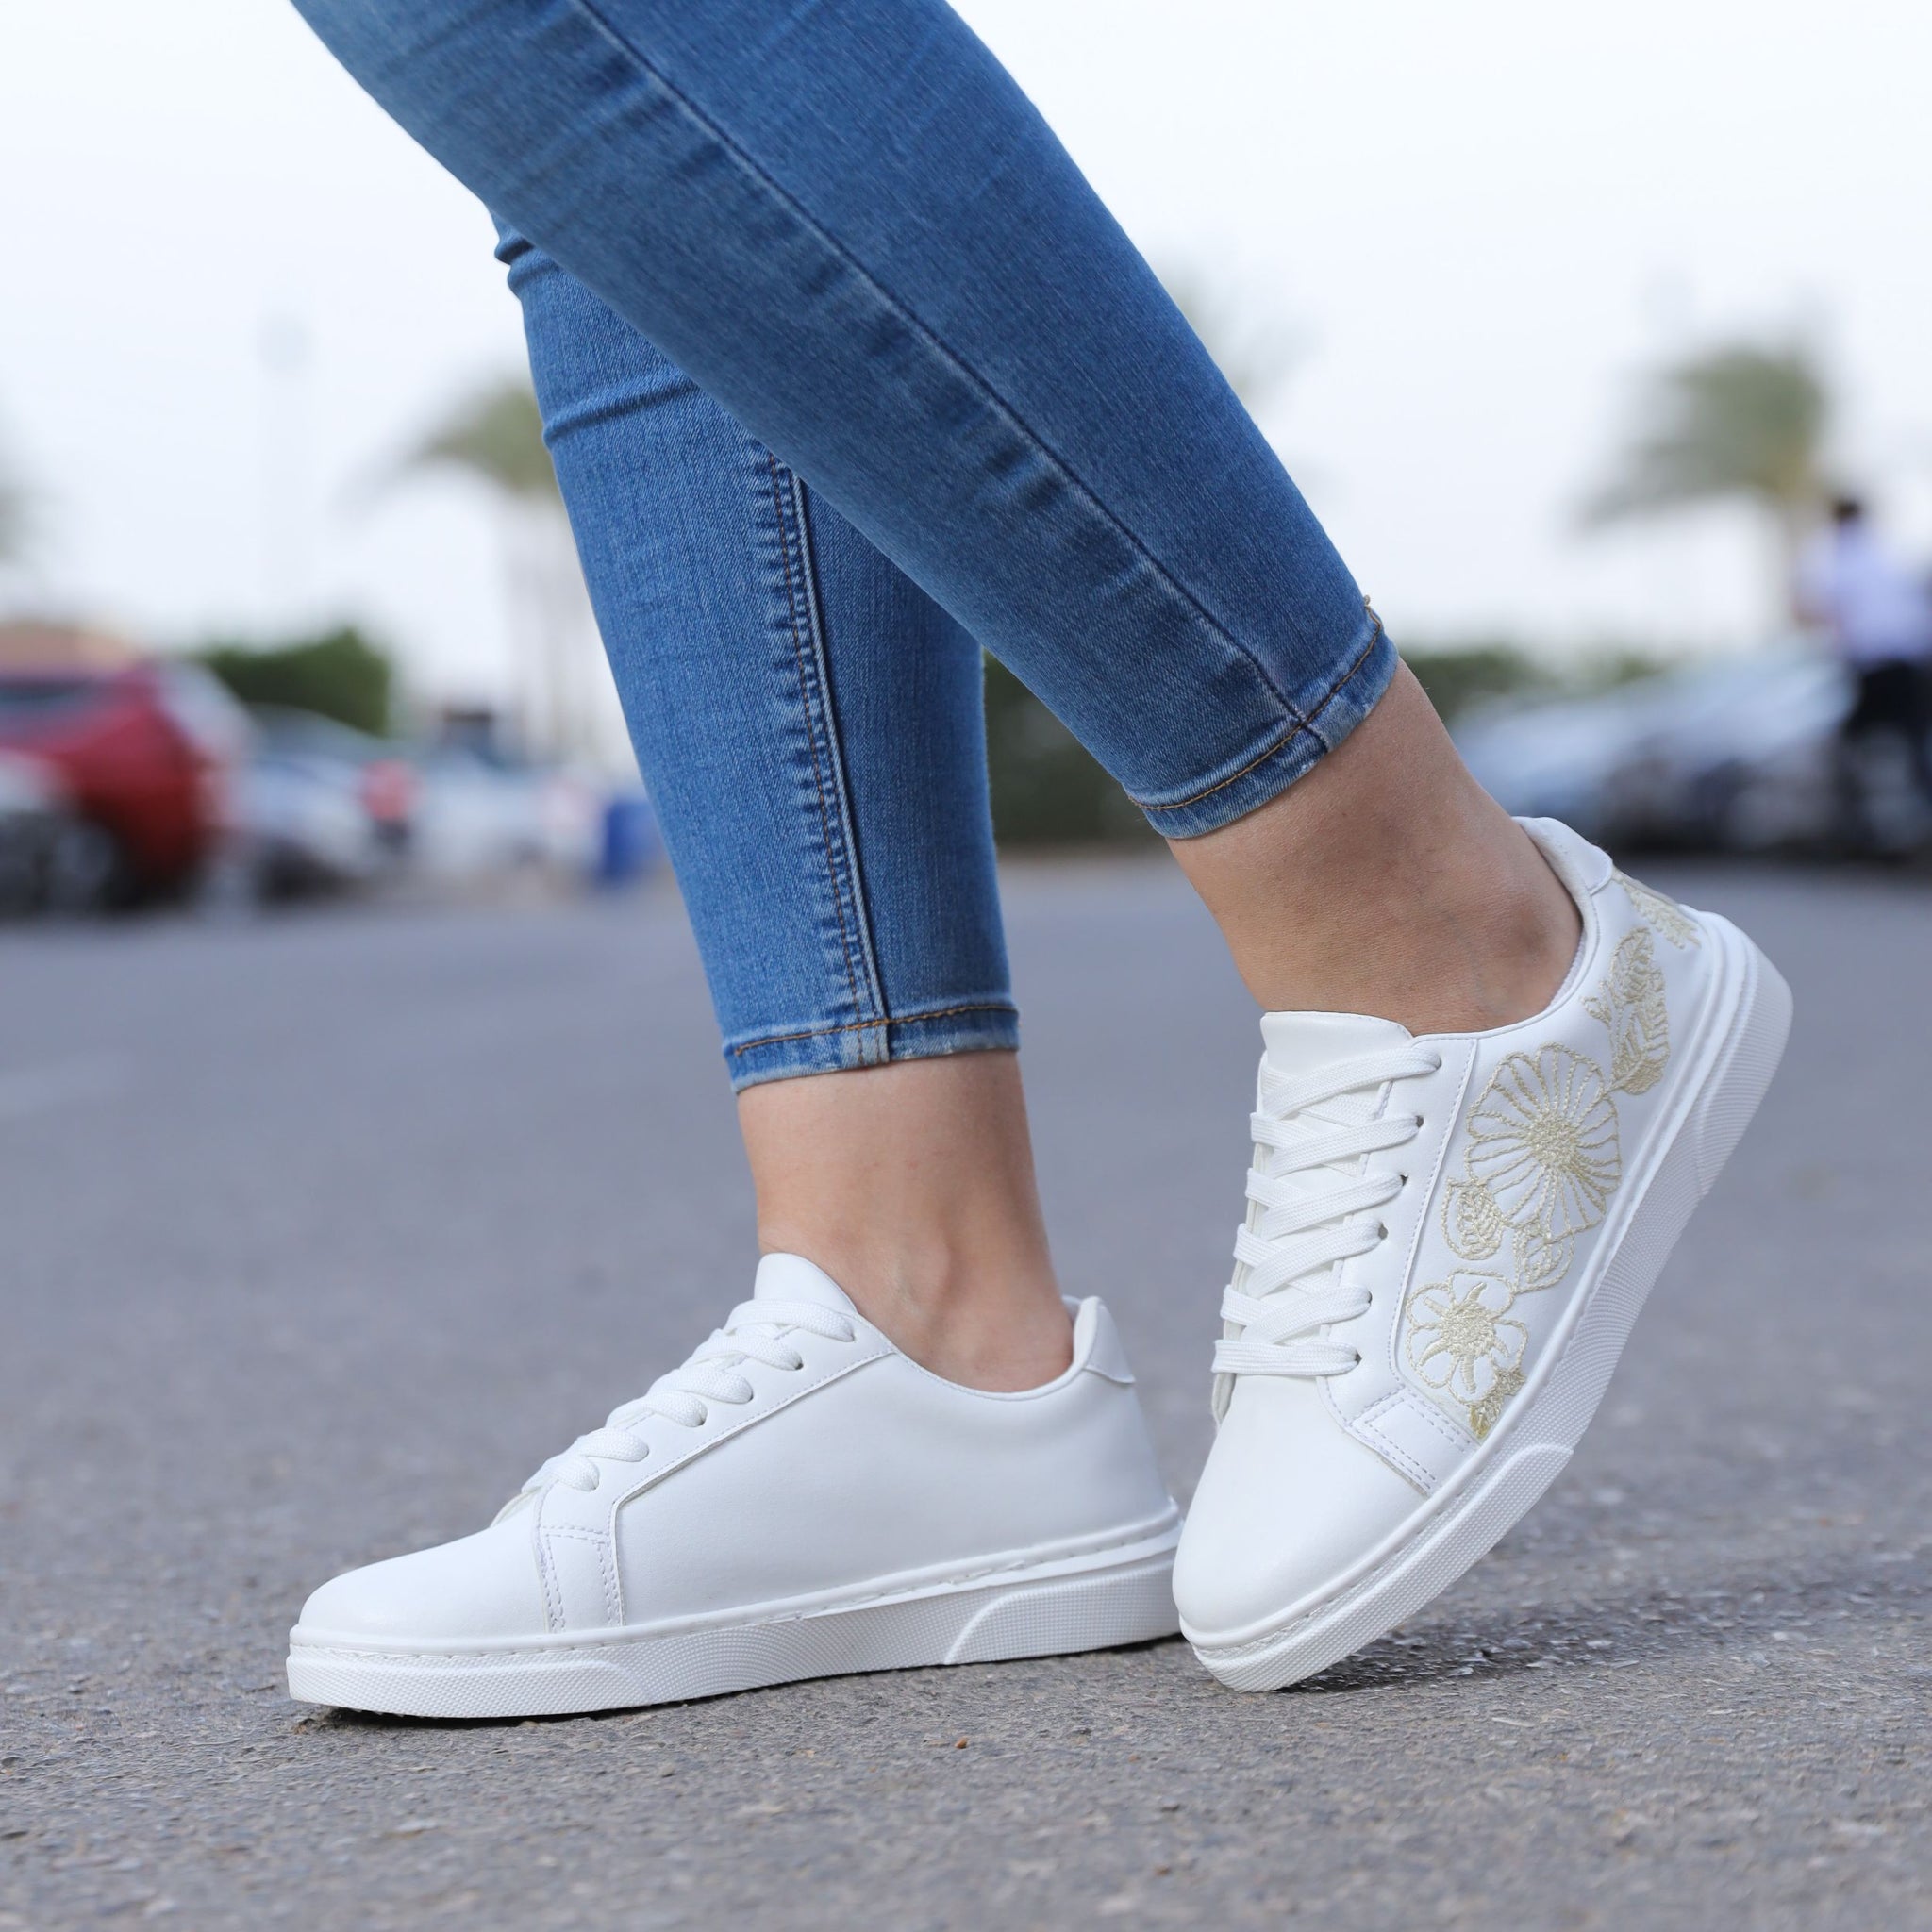 Gunid Golden Embroidered Flat Sneakers